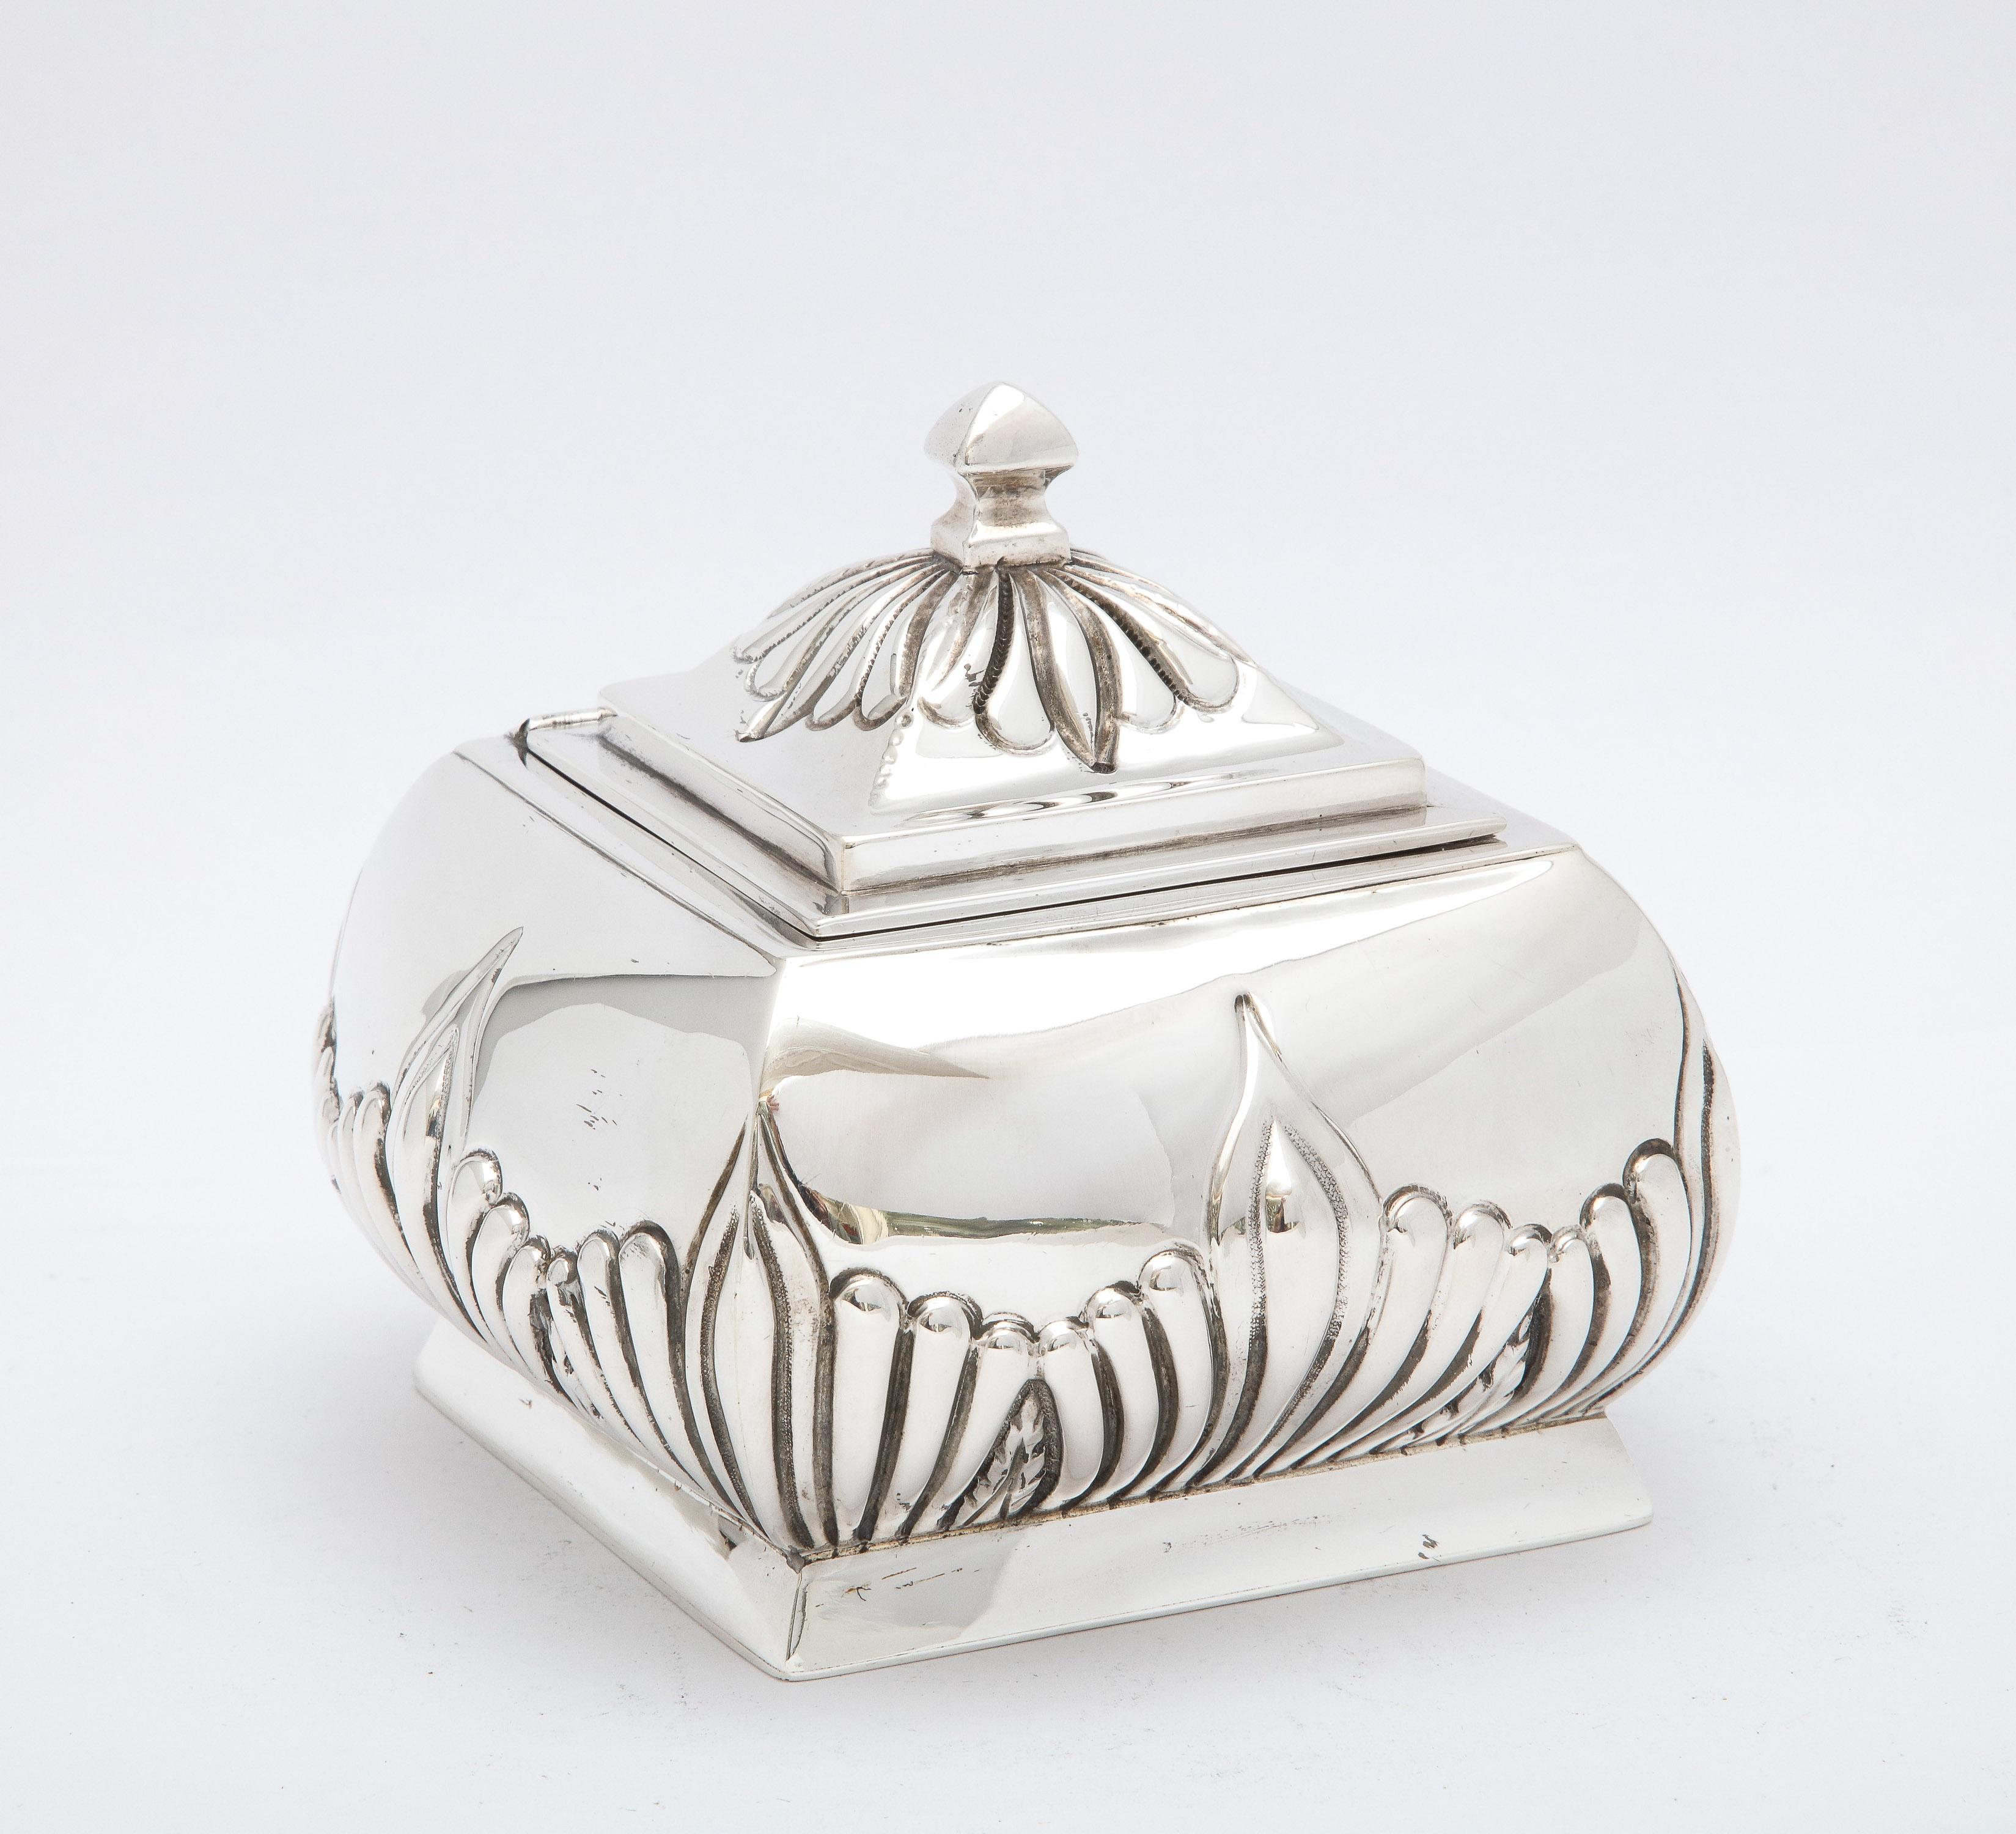 Victorian Period, sterling silver tea caddy with hinged lid, Birmingham, England, year-hallmarked for 1891, Stokes and Ireland, Ltd. - makers. Lovely design, having a square pedestal base and rounded corners. Measures 4 1/2 inches high (to top of